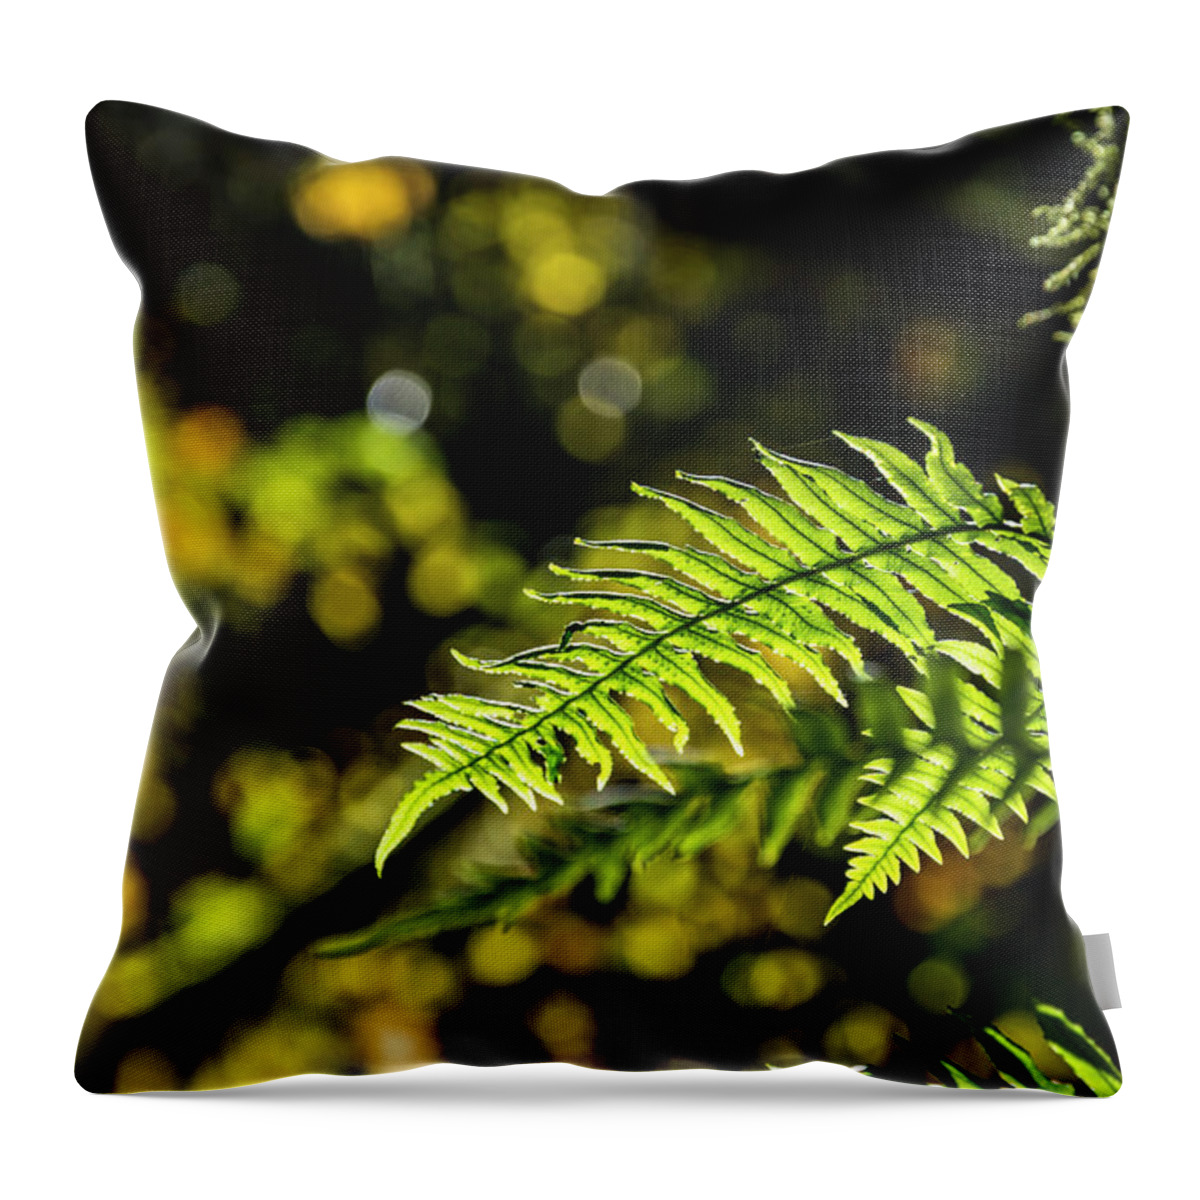 Fern Throw Pillow featuring the photograph Fall Ferns 2 by Pelo Blanco Photo